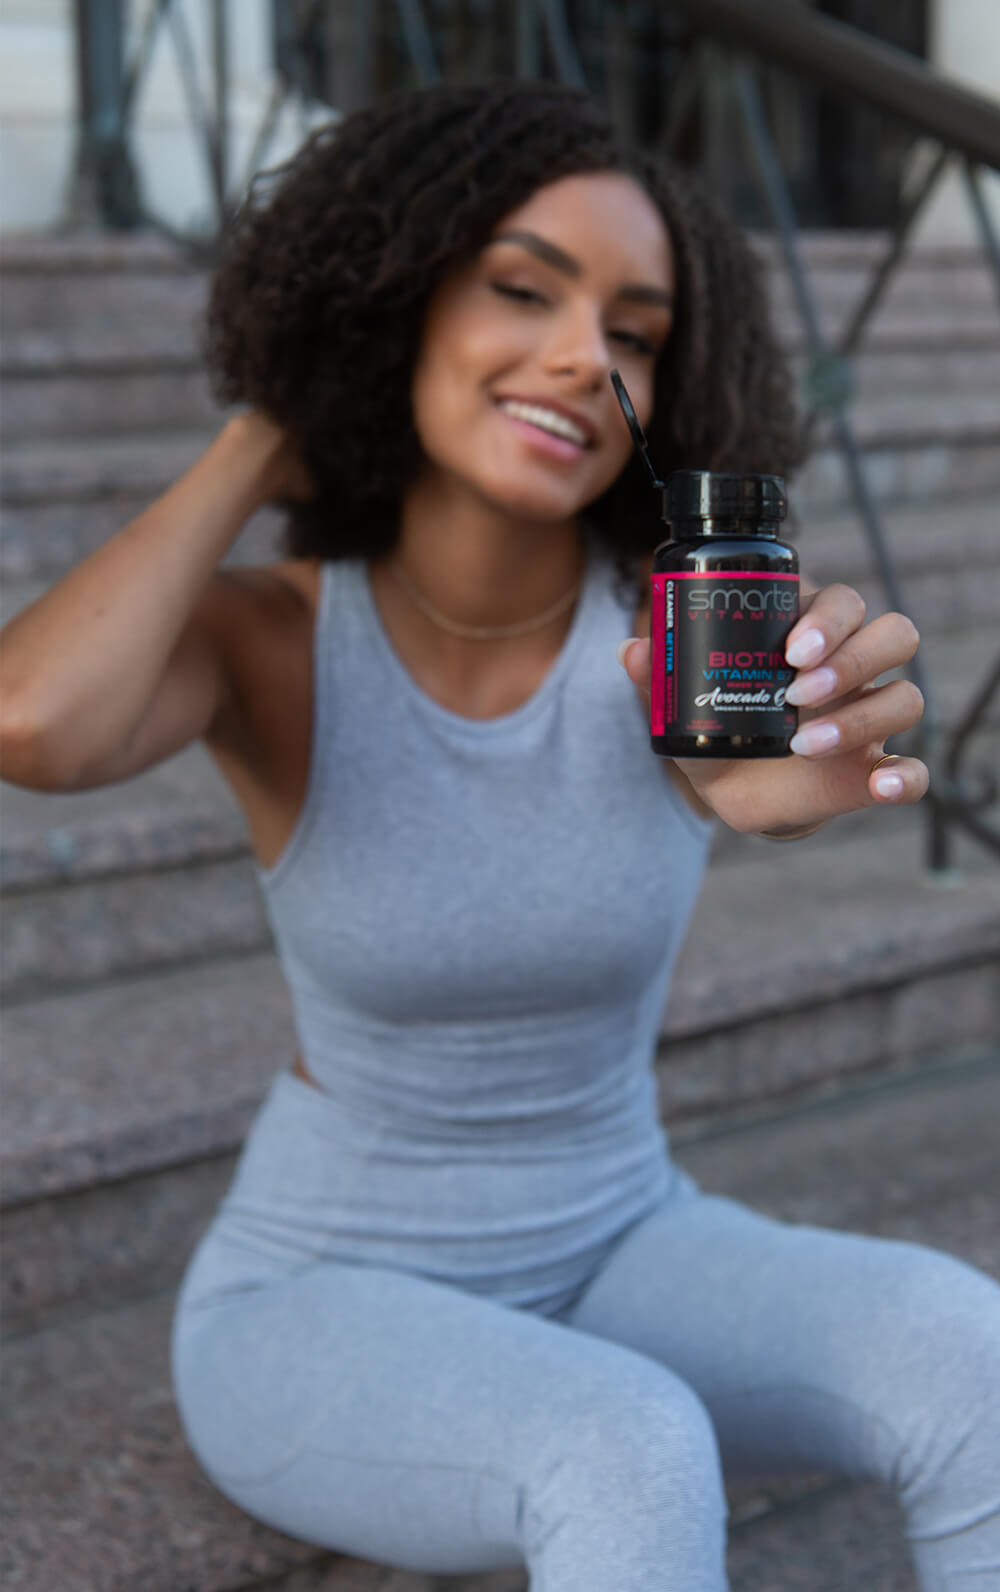 Woman holding smarter biotin bottle touching hair and smiling